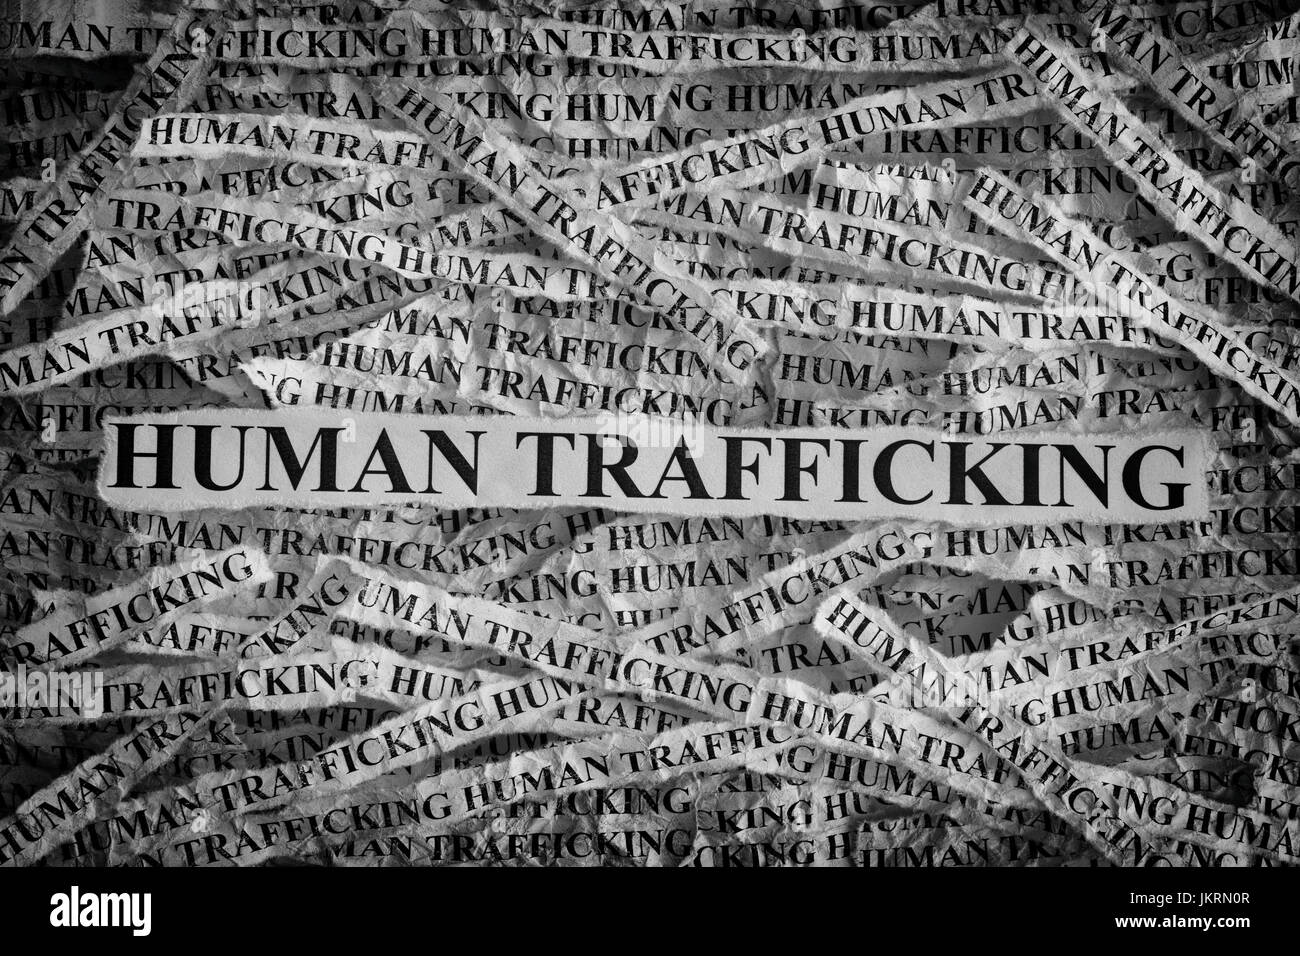 Human Trafficking. Torn pieces of paper with the words Human Trafficking. Concept Image. Black and White. Closeup. Stock Photo